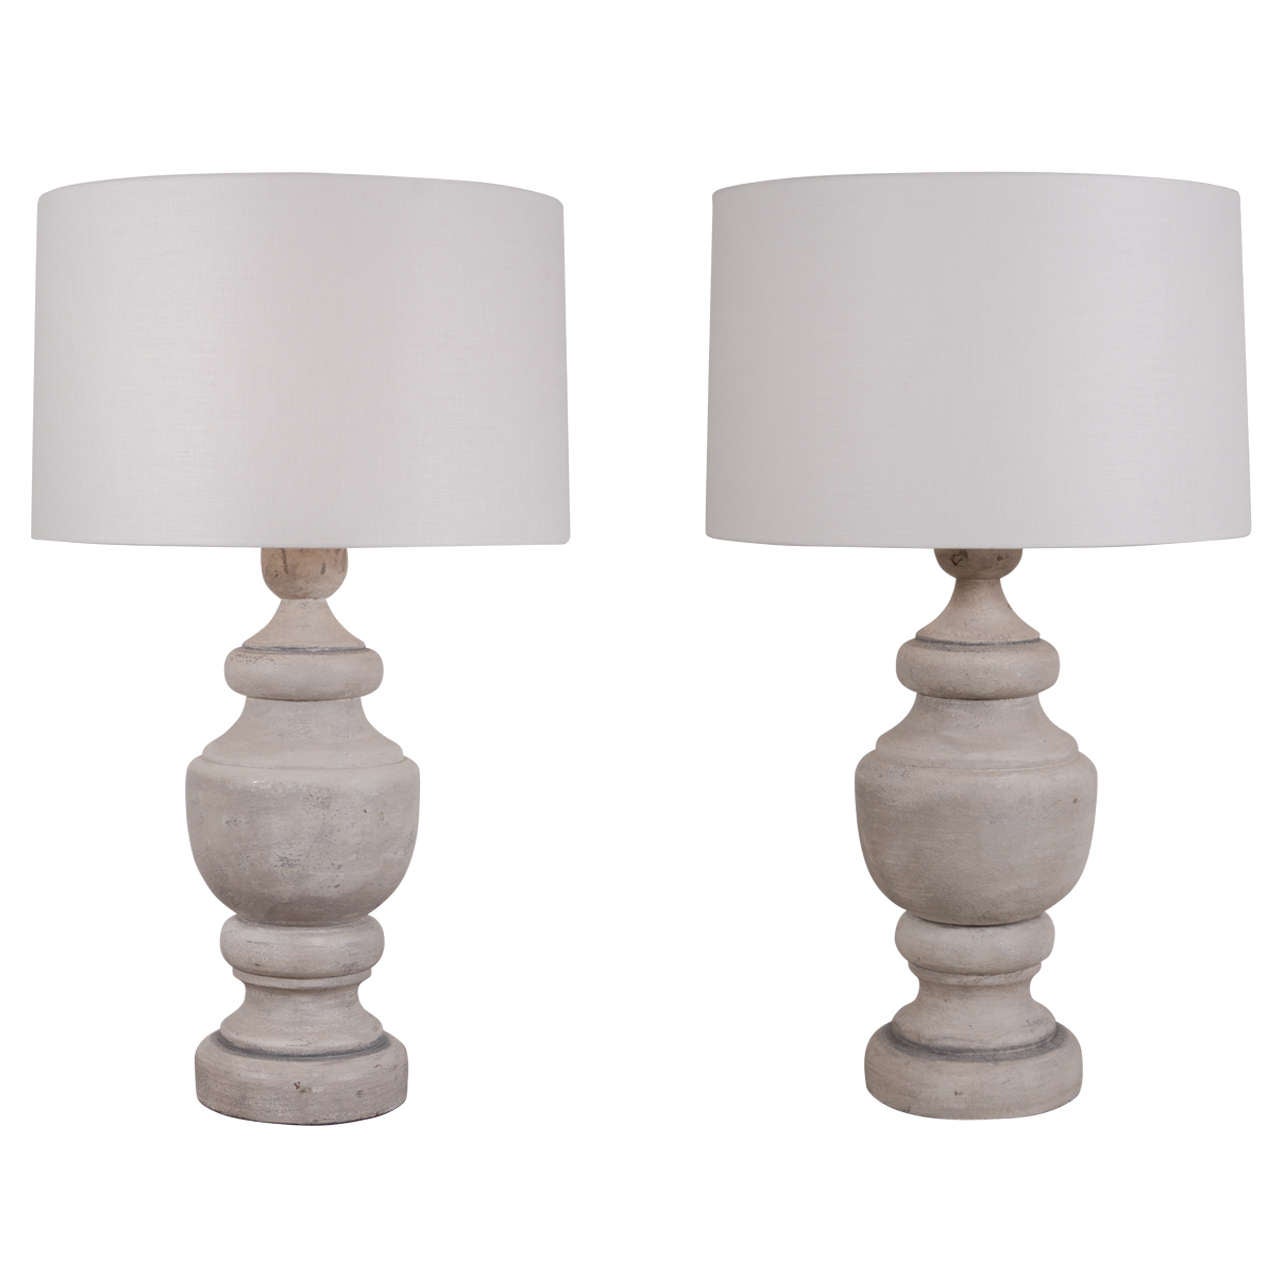 Pair of Large Custom Lamps from Vintage Finials